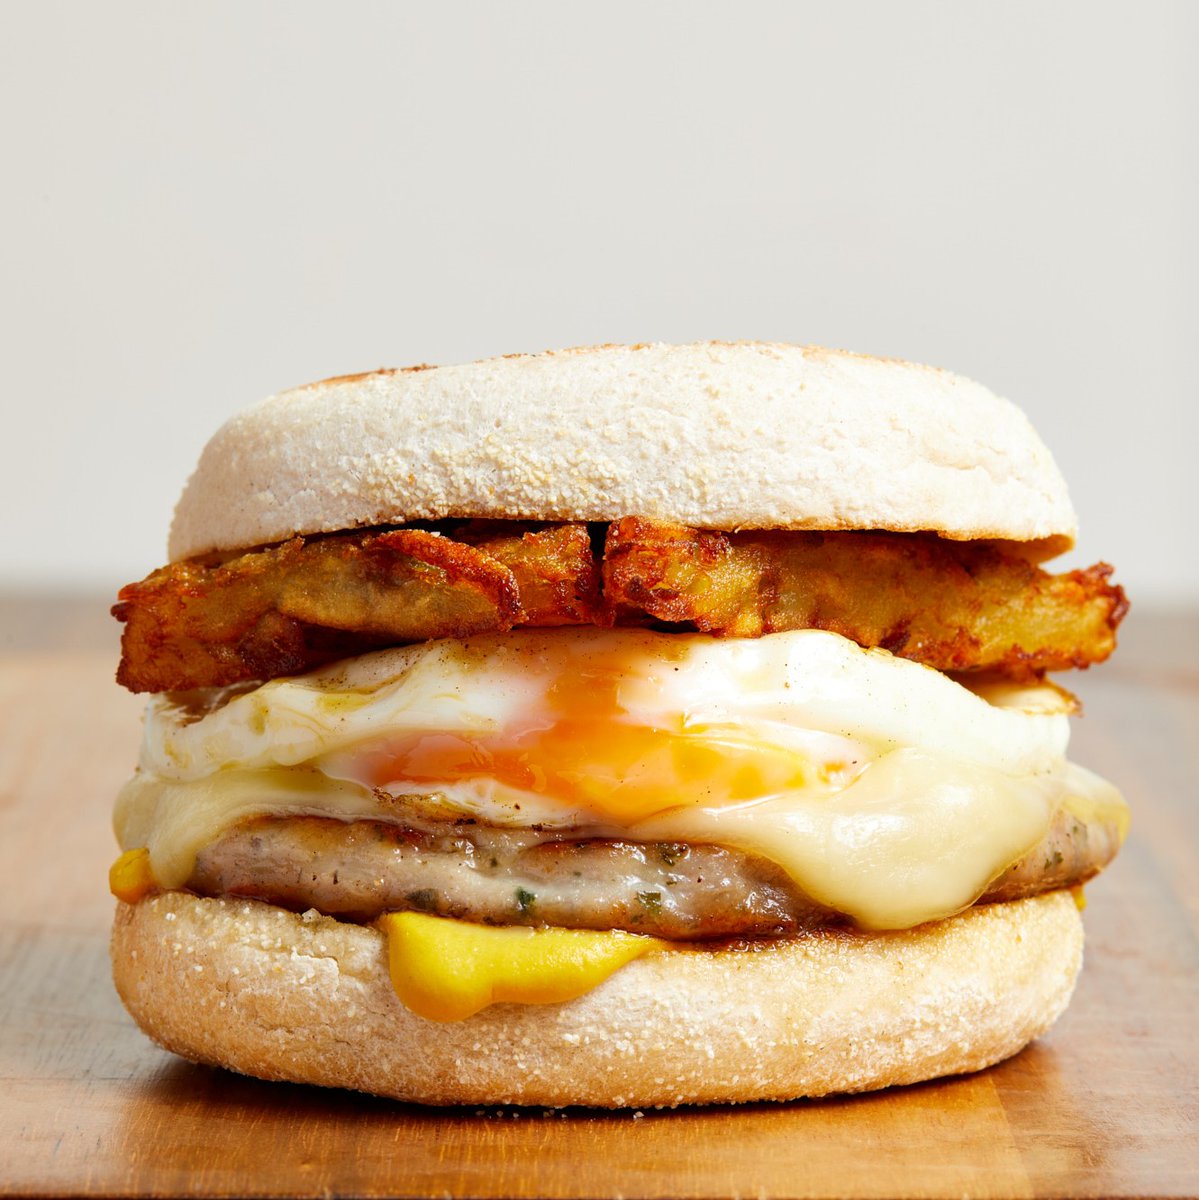 Hello, I’m the Boston breakfast muffin. I’m about 4 inches tall, packed with free-range meat and eggs, gooey cheese, American mustard and a homemade hash brown. I’m always available in the café, or you can take me home. Come pick me up whenever, I’m hard to resist. #btpcafes